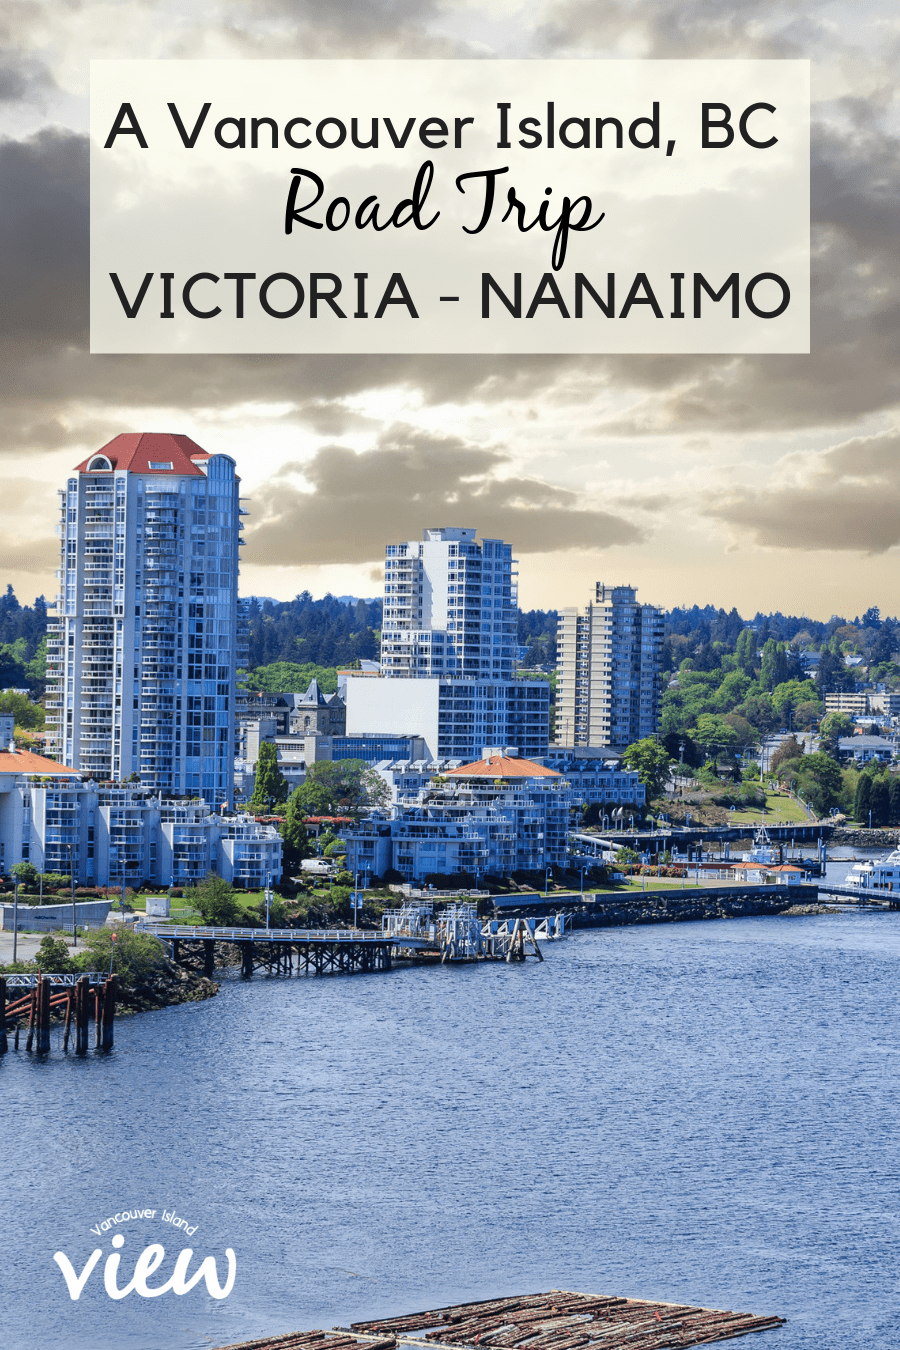 Are you heading to Victoria, BC and looking for things to do? Why not make the trek to Nanaimo for a great Vancouver Island road trip. Travel this scenic highway and find unique locations along the way.